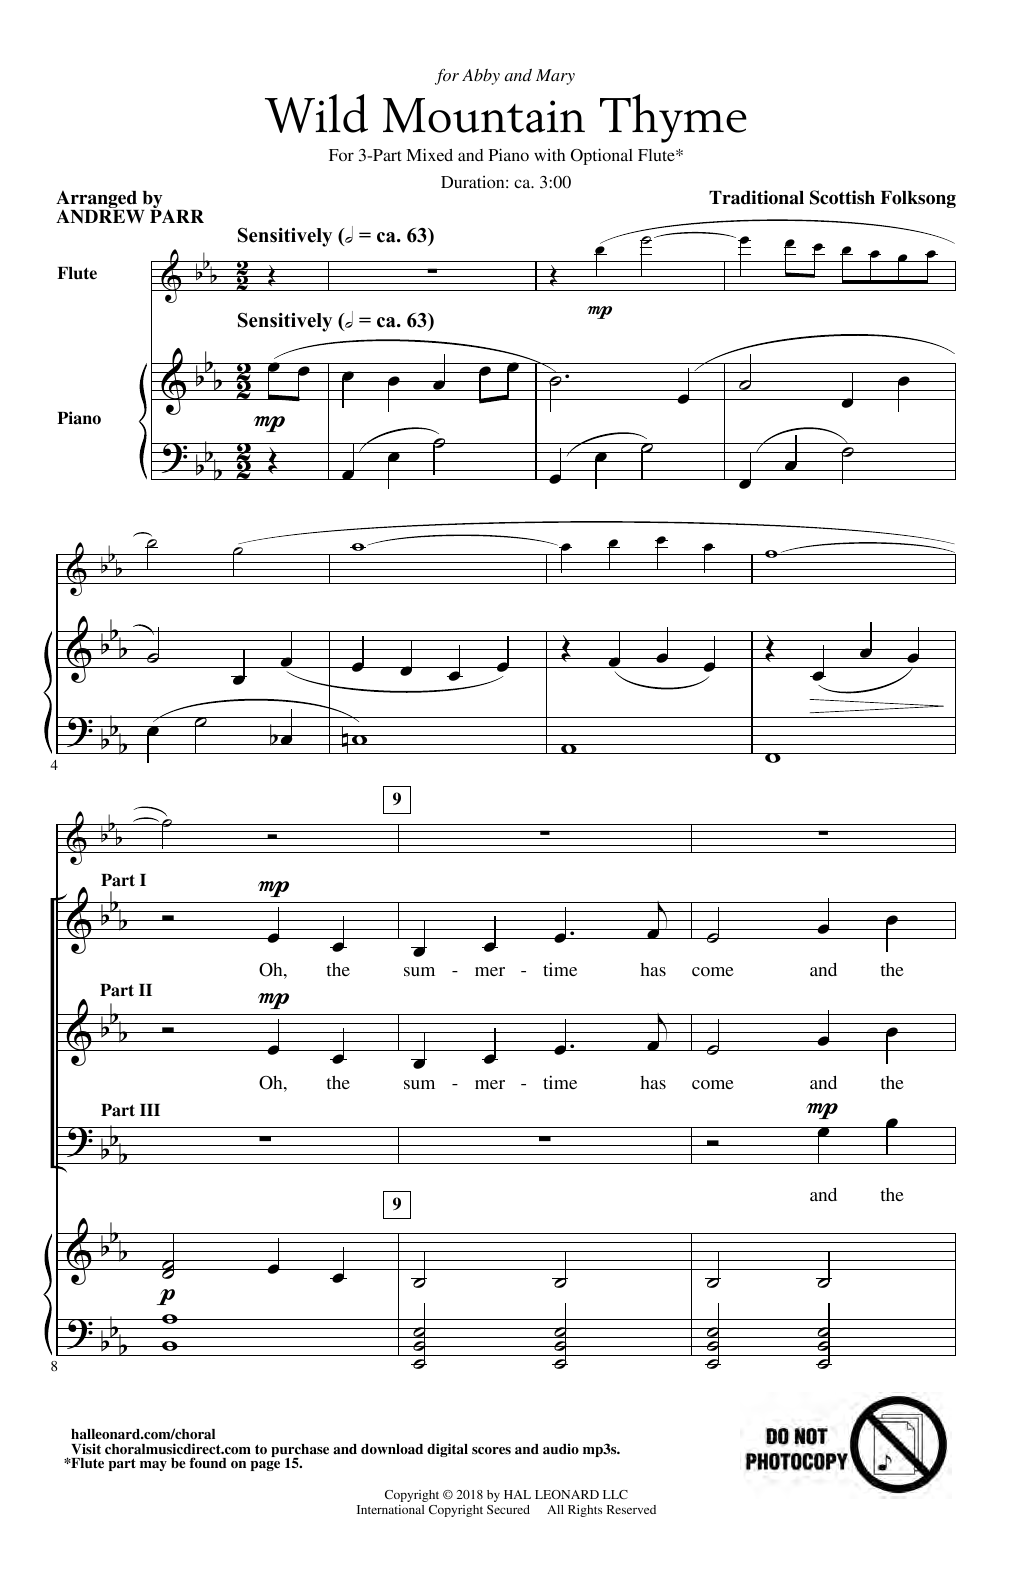 Download Traditional Scottish Folk Song Wild Mountain Thyme (arr. Andrew Parr) Sheet Music